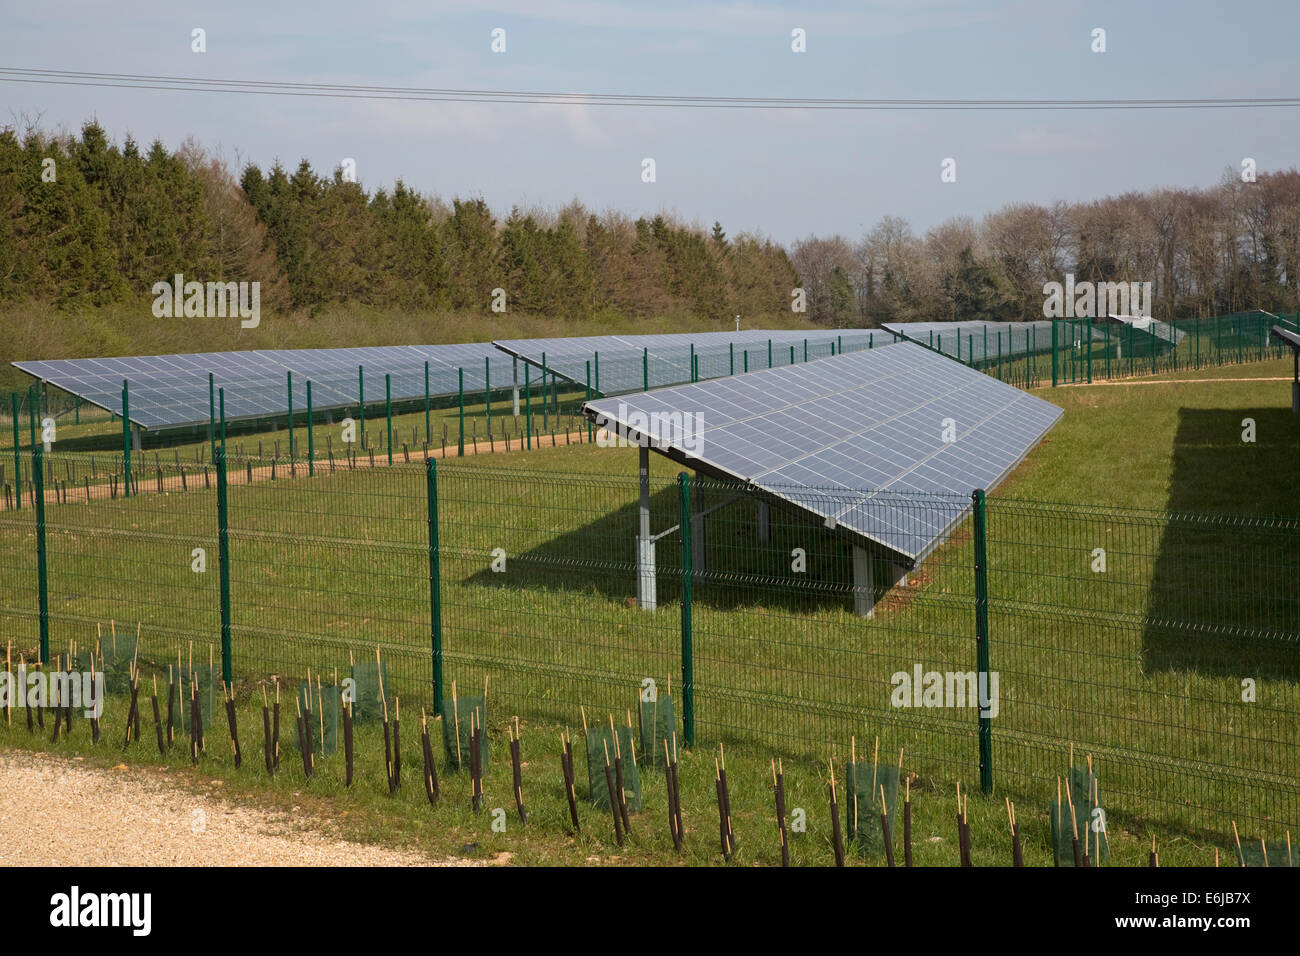 Field of photovoltaic PV panels Solar farm near Chipping Campden Glos UK Stock Photo